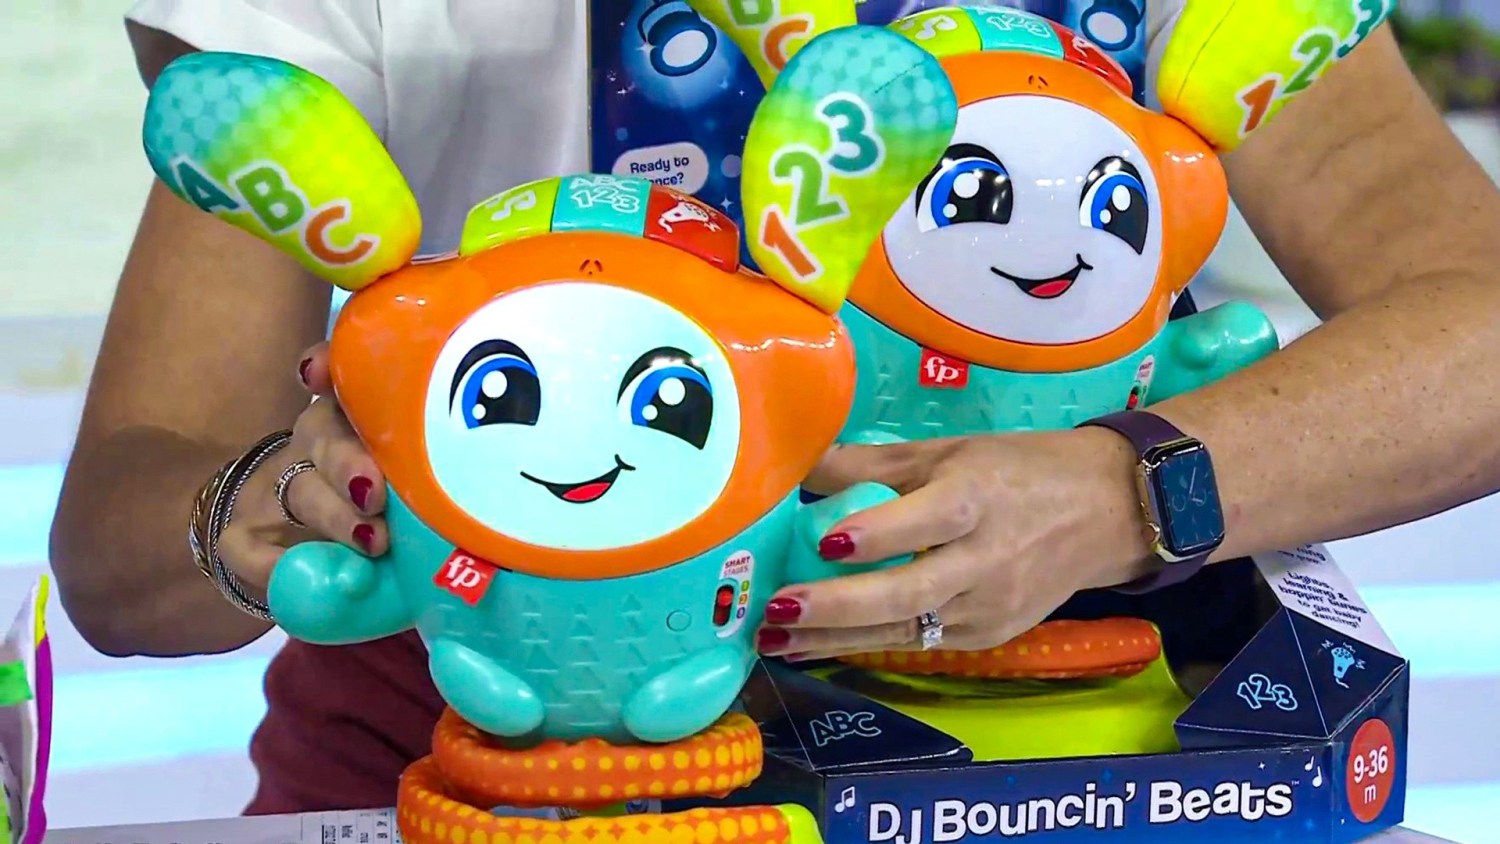 16 of the hottest toys for kids in 2021 that parents should buy